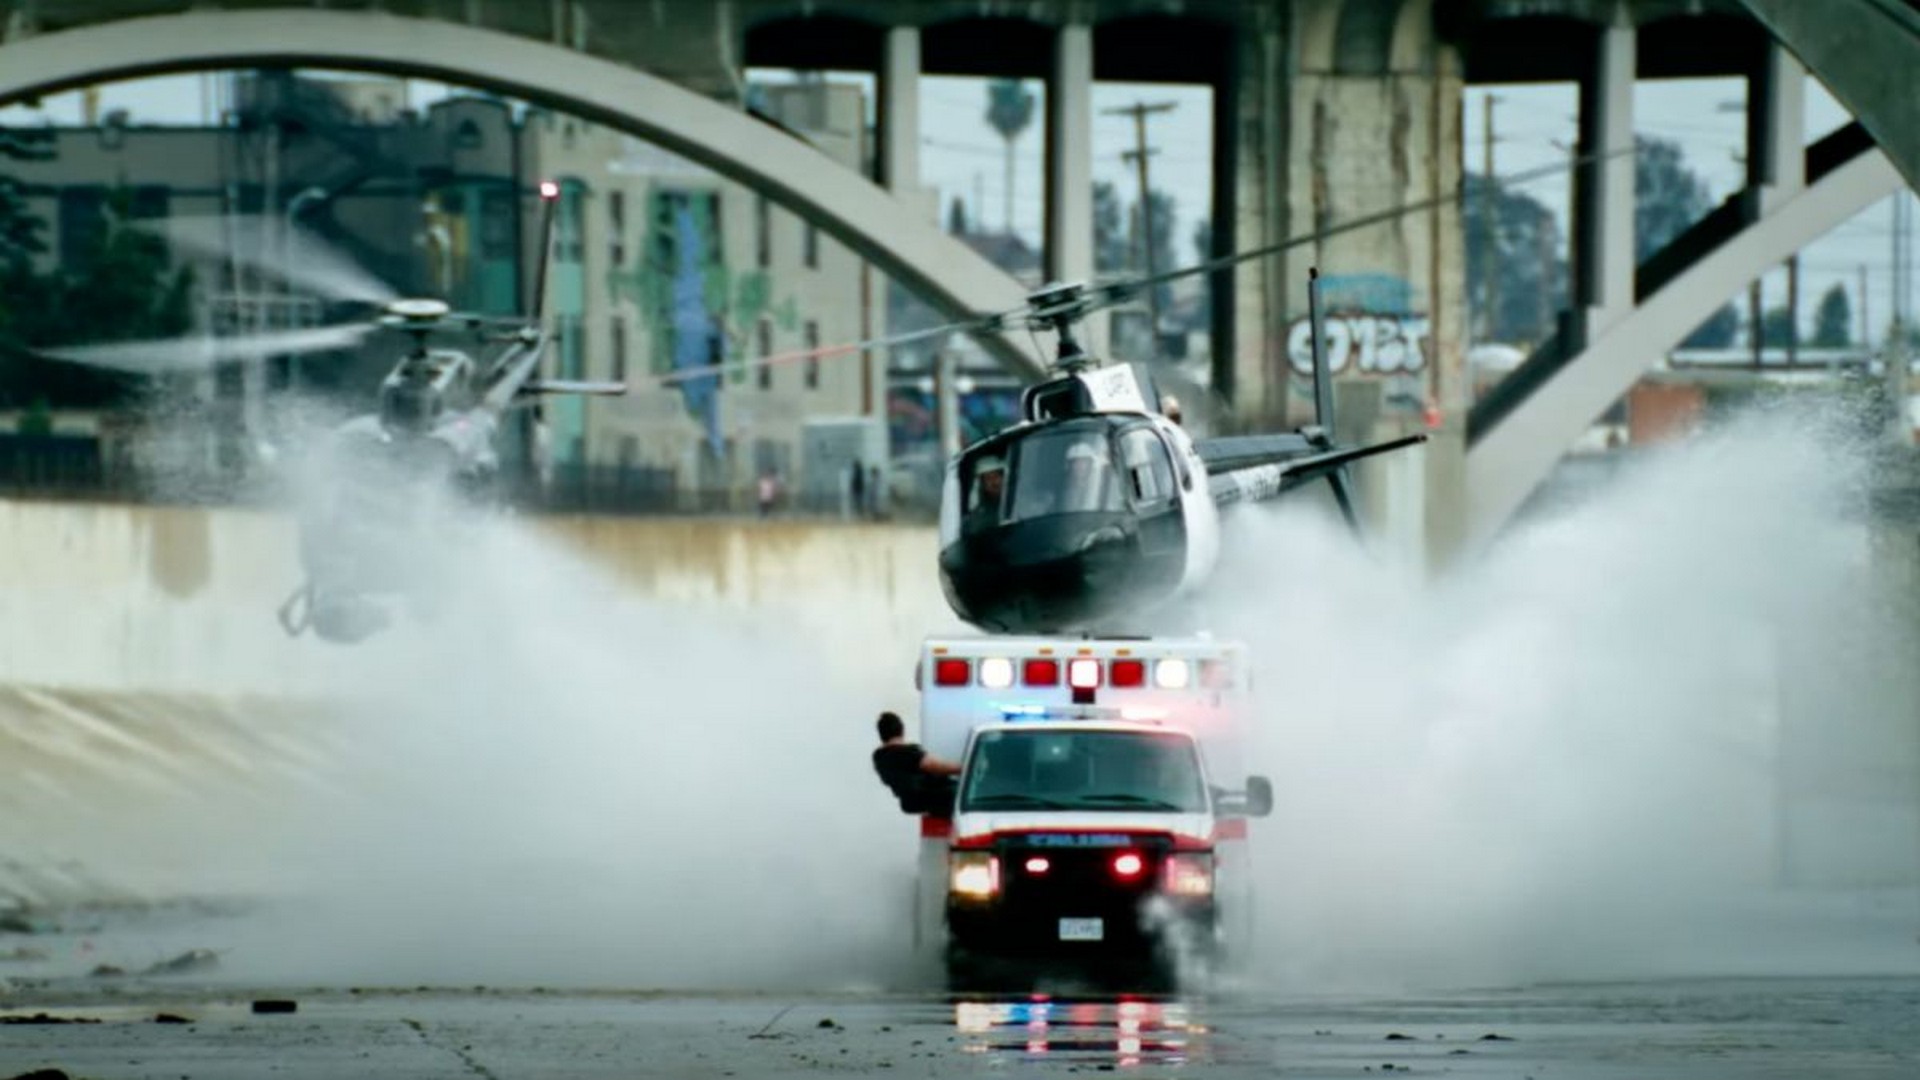 First-Look At Trailer For Michael Bay’s AMBULANCE Starring Jake Gyllenhaal